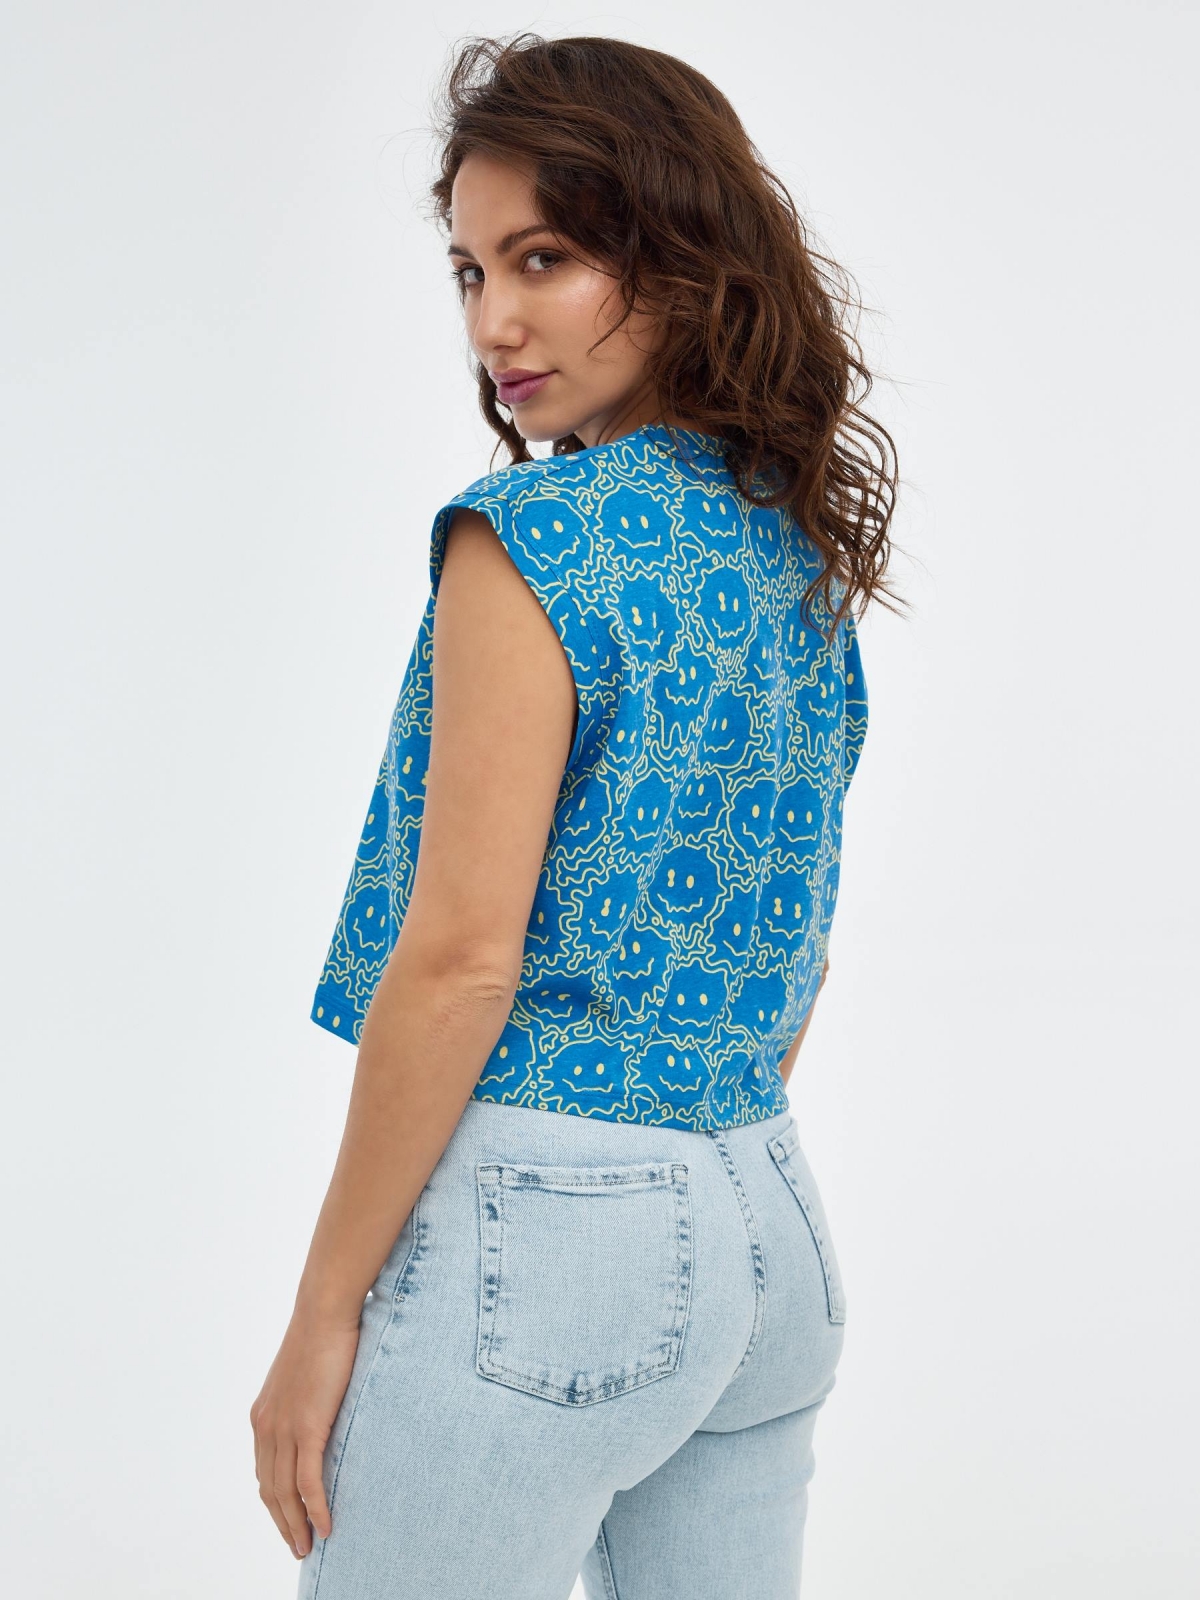 All over print t-shirt light blue middle back view